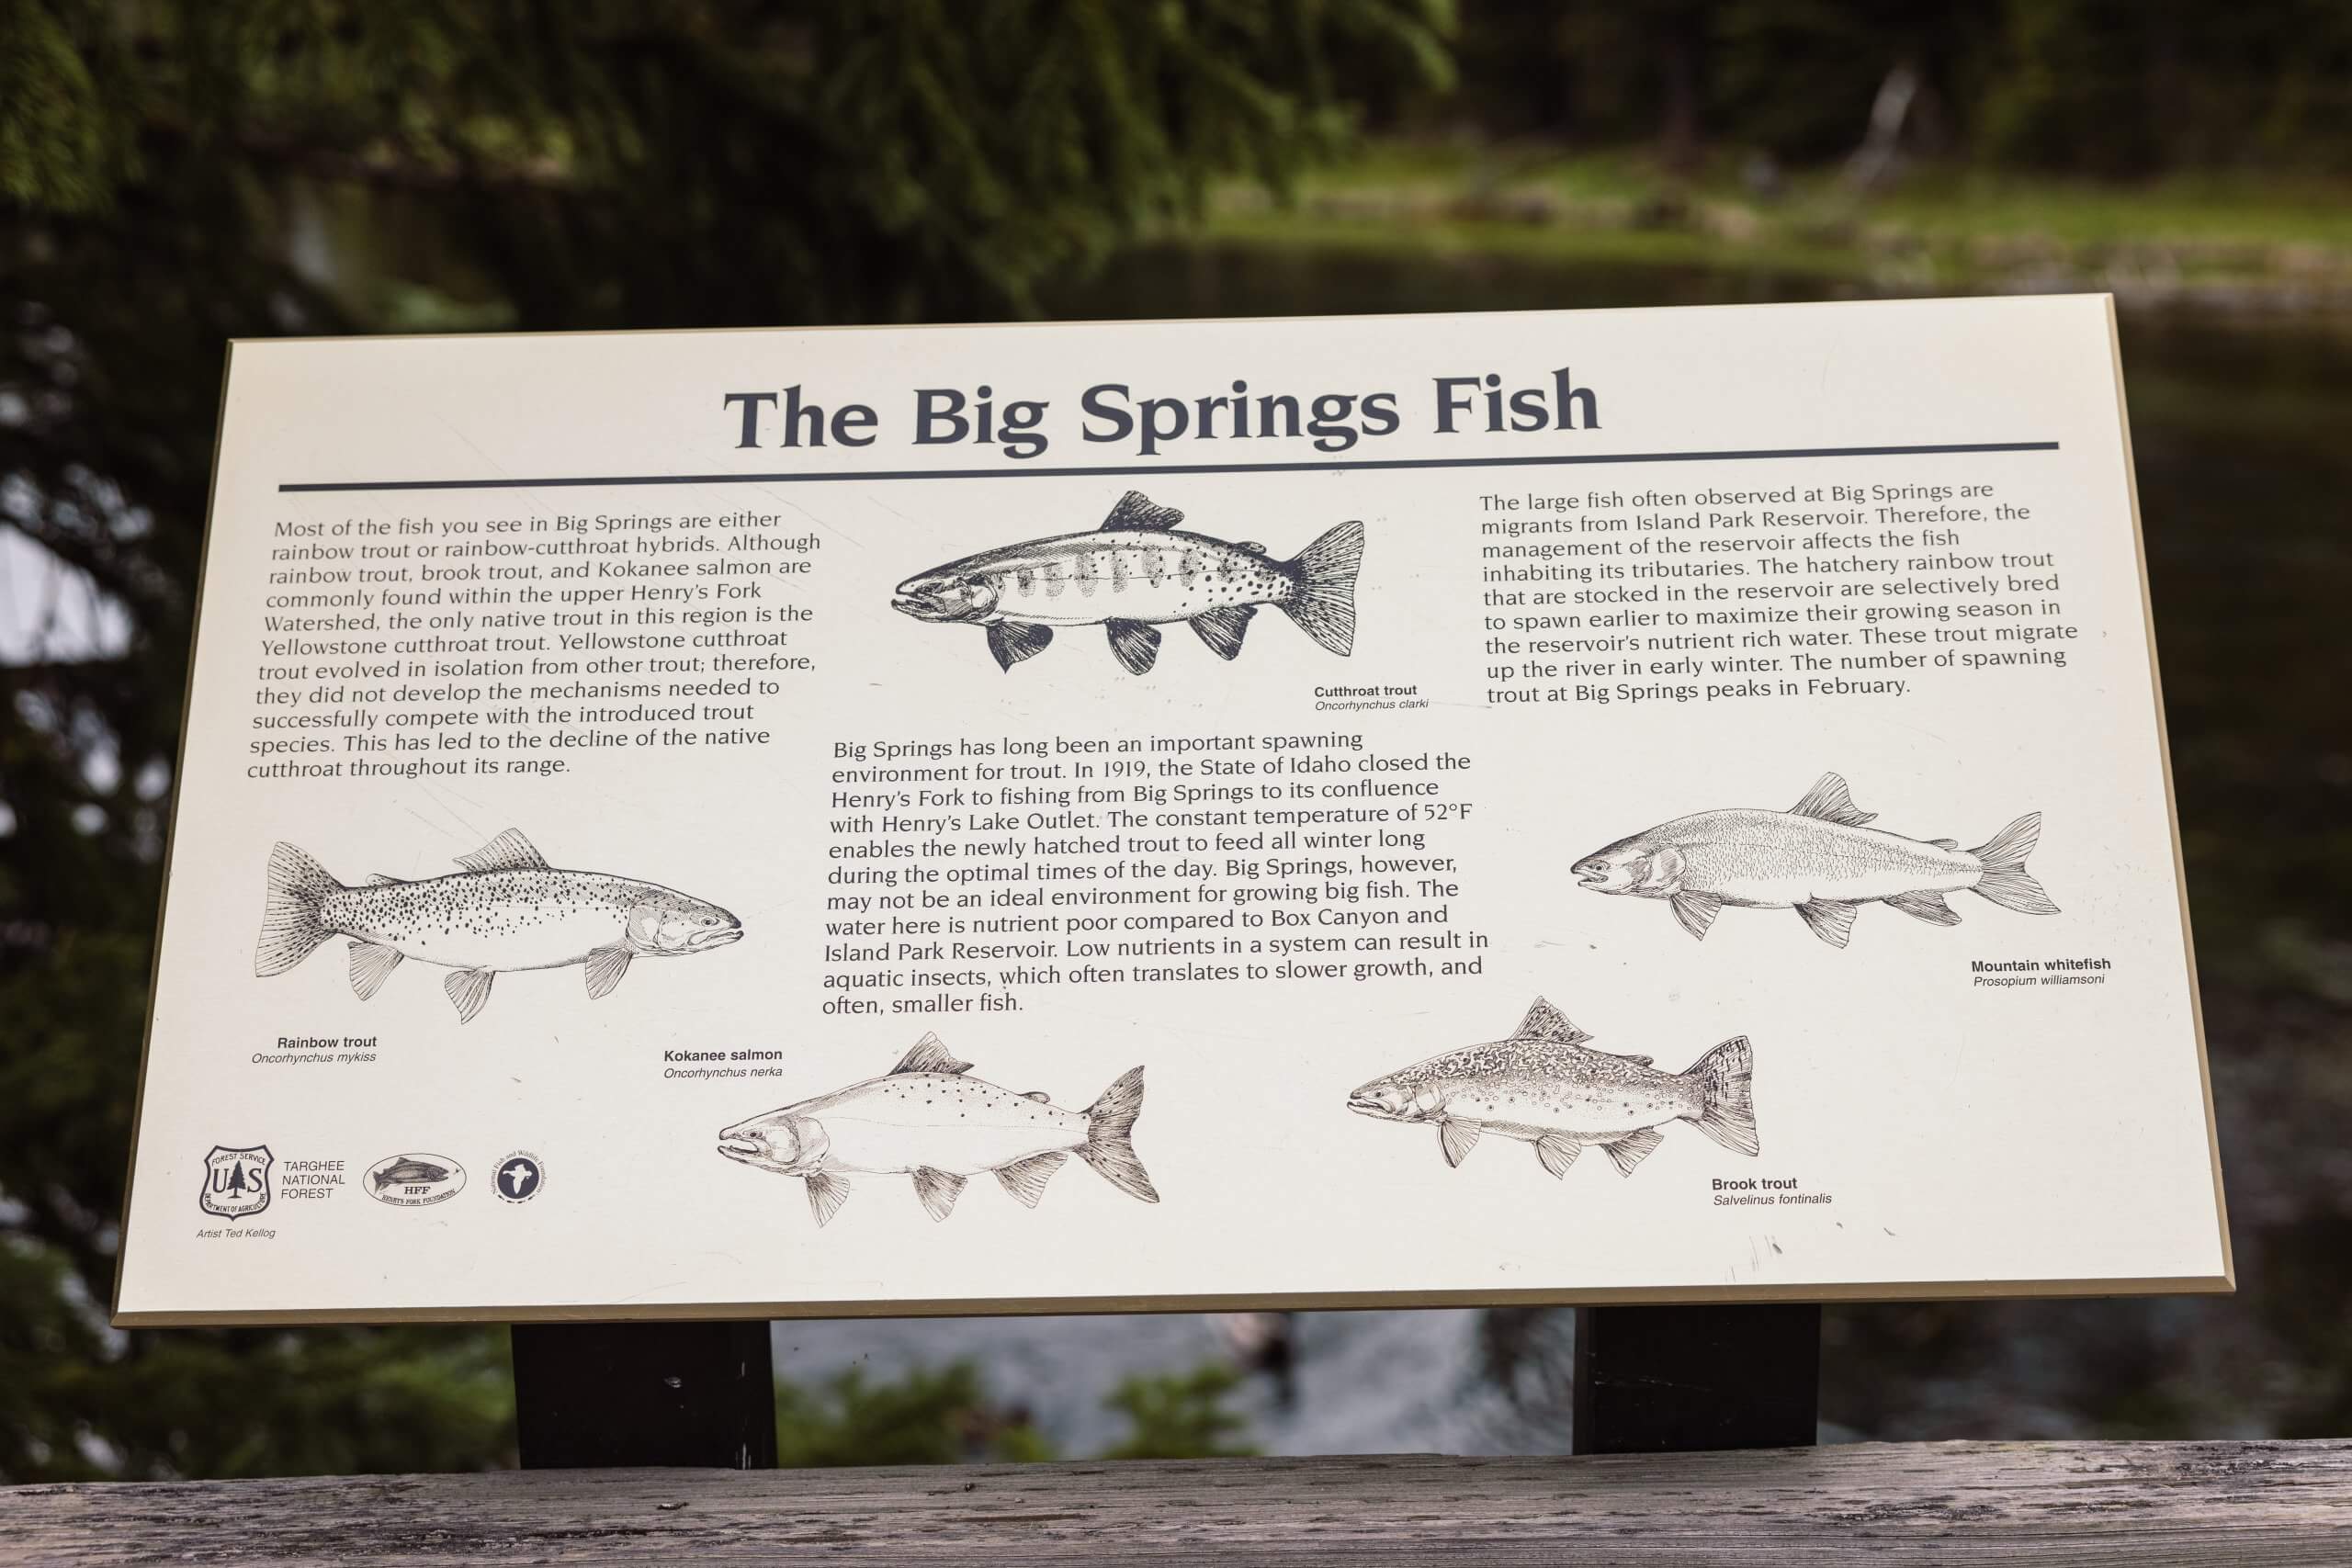 A sign at Big Springs detailing the different types of fish found in the water with illustrations.